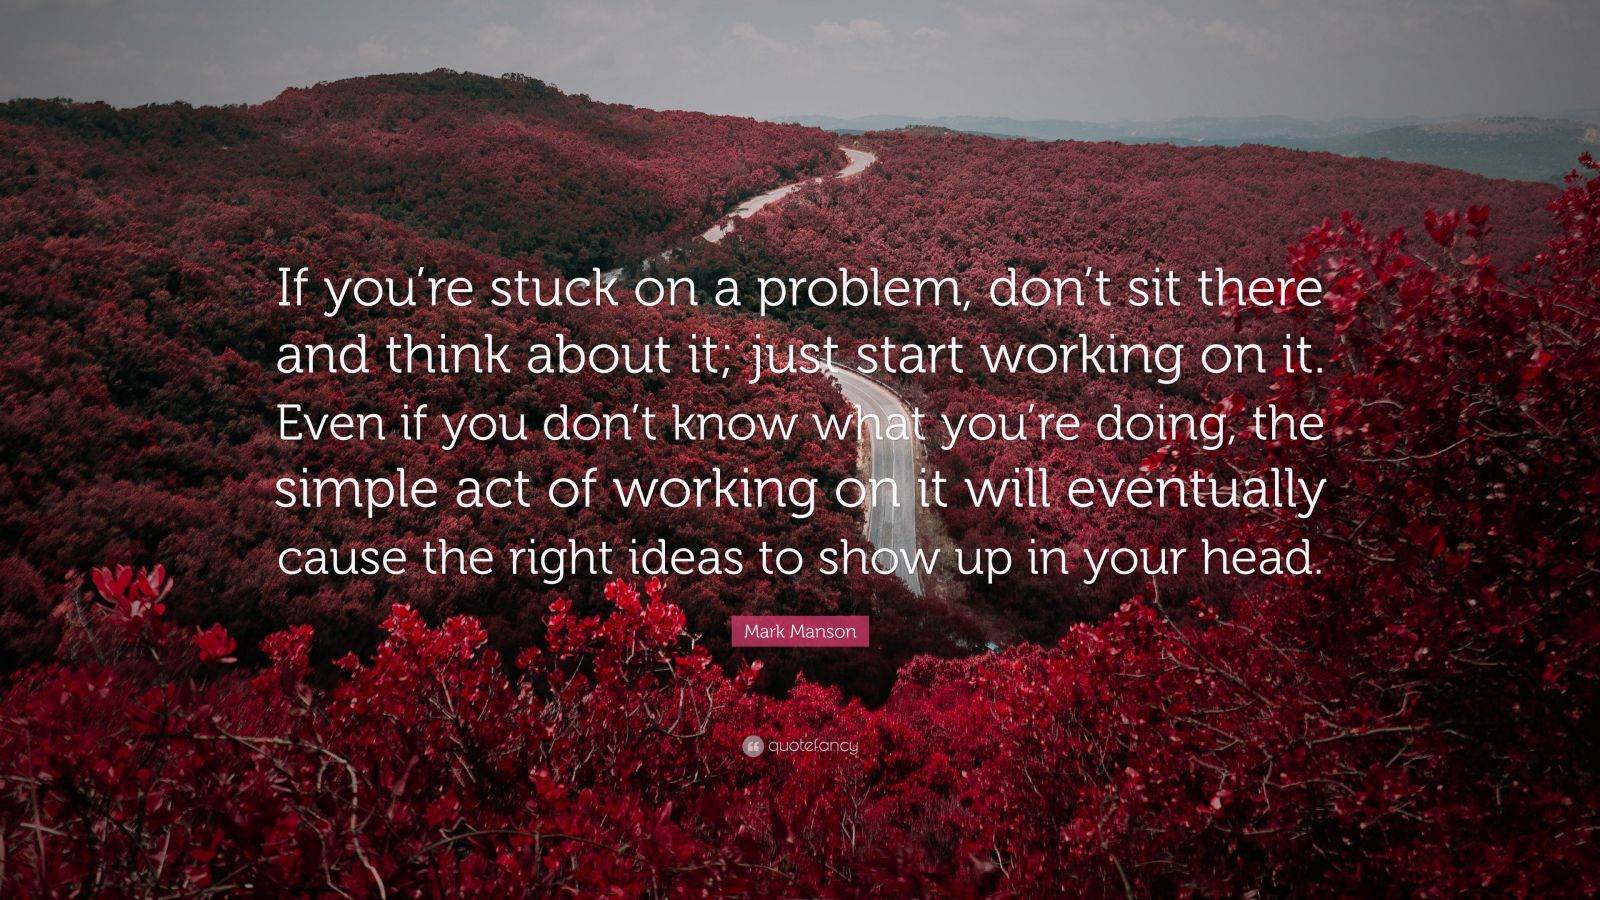 Mark Manson Quote: “If you’re stuck on a problem, don’t sit there and